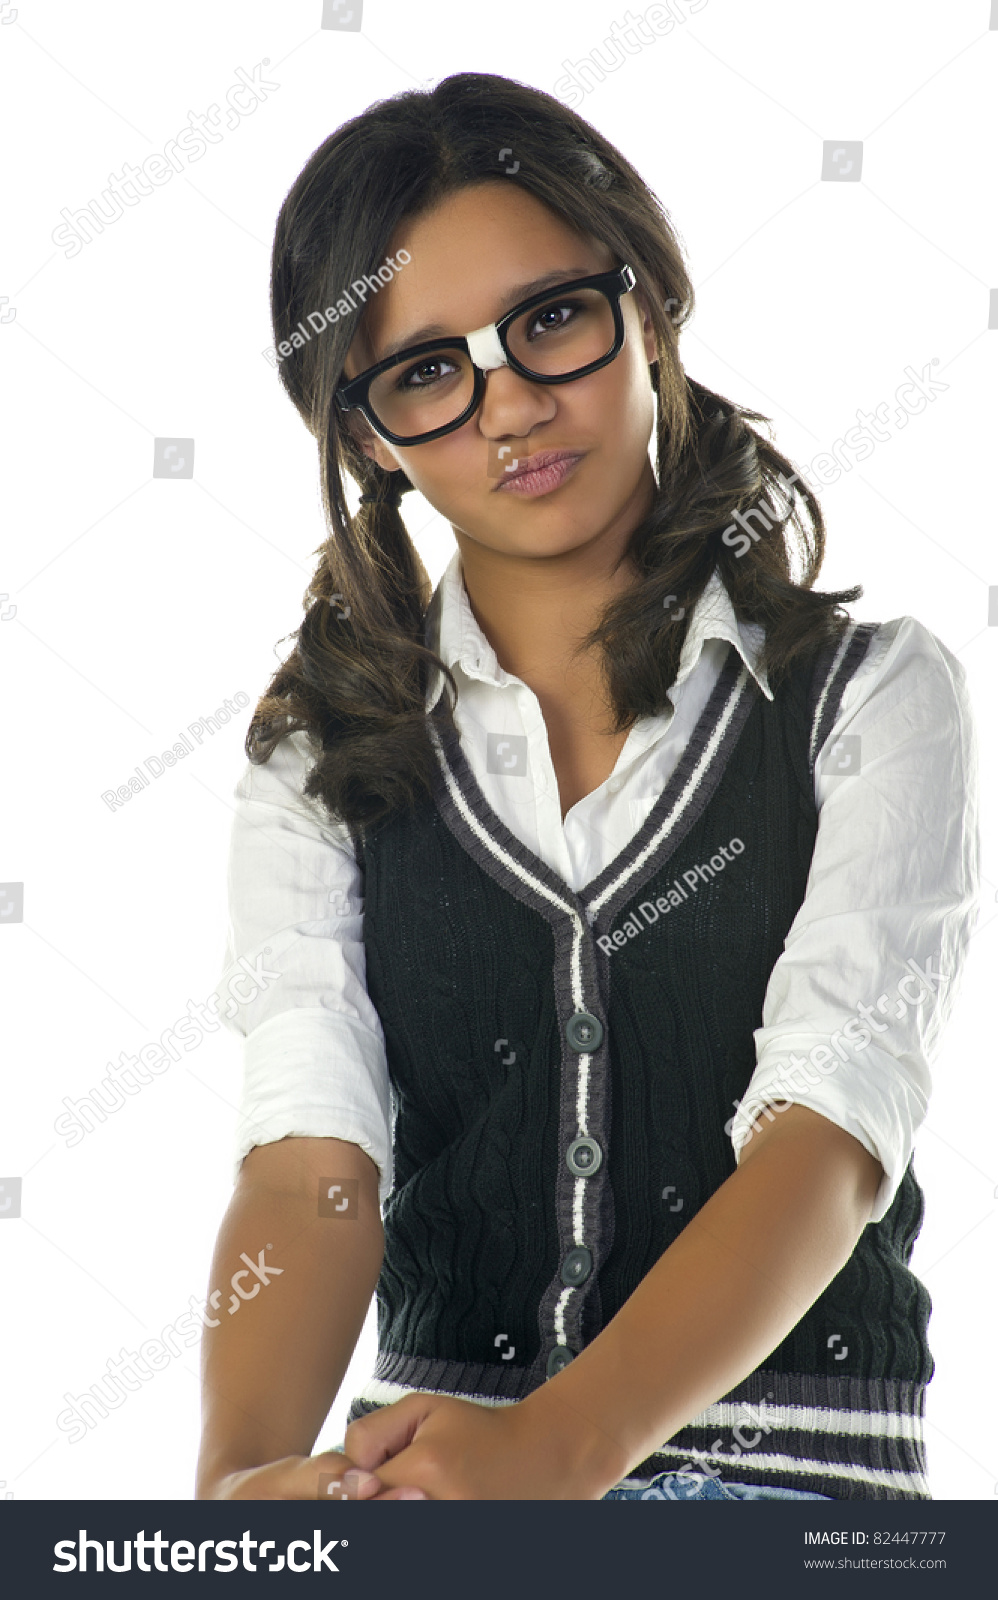 Teenage Nerd Girl With Black Glasses Sticking Out Her